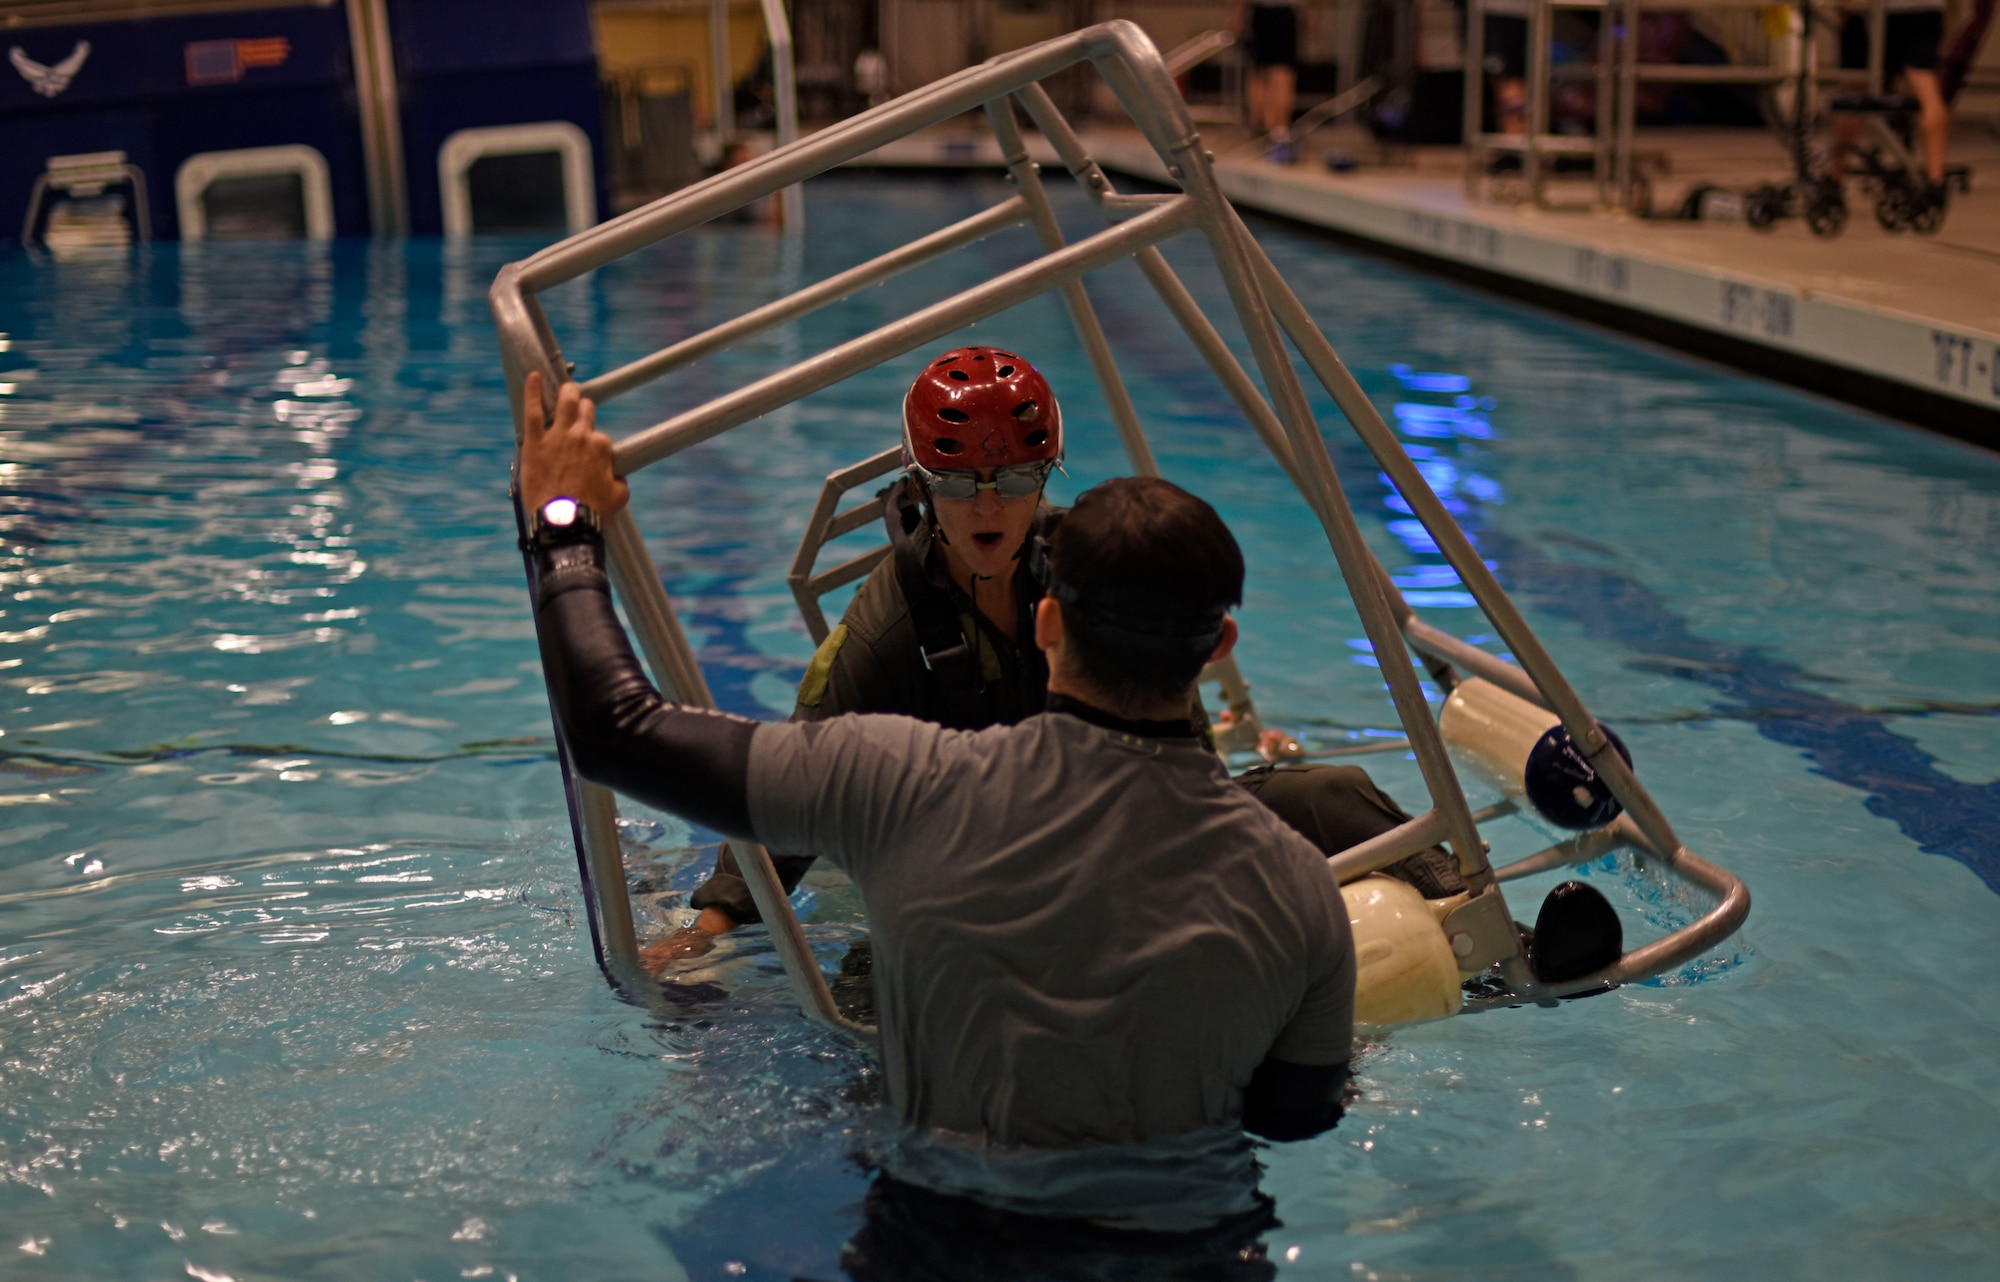 Nicole A. Mann, NASA astronaut, prepares to be flipped upside down by Survival Evasion Resistance and Escape specialists during a water survival course at Fairchild Air Force Base, Washington, May 18, 2018. One simulation that the NASA team completed during their stay at Fairchild, was the dunker course. Trainees are strapped inside a modular egress training system that simulates a mock helicopter with lap belts that submerges into water and rotates to teach aircrew how to find their exits to safety. (U.S. Air Force photo/Airman 1st Class Jesenia Landaverde)